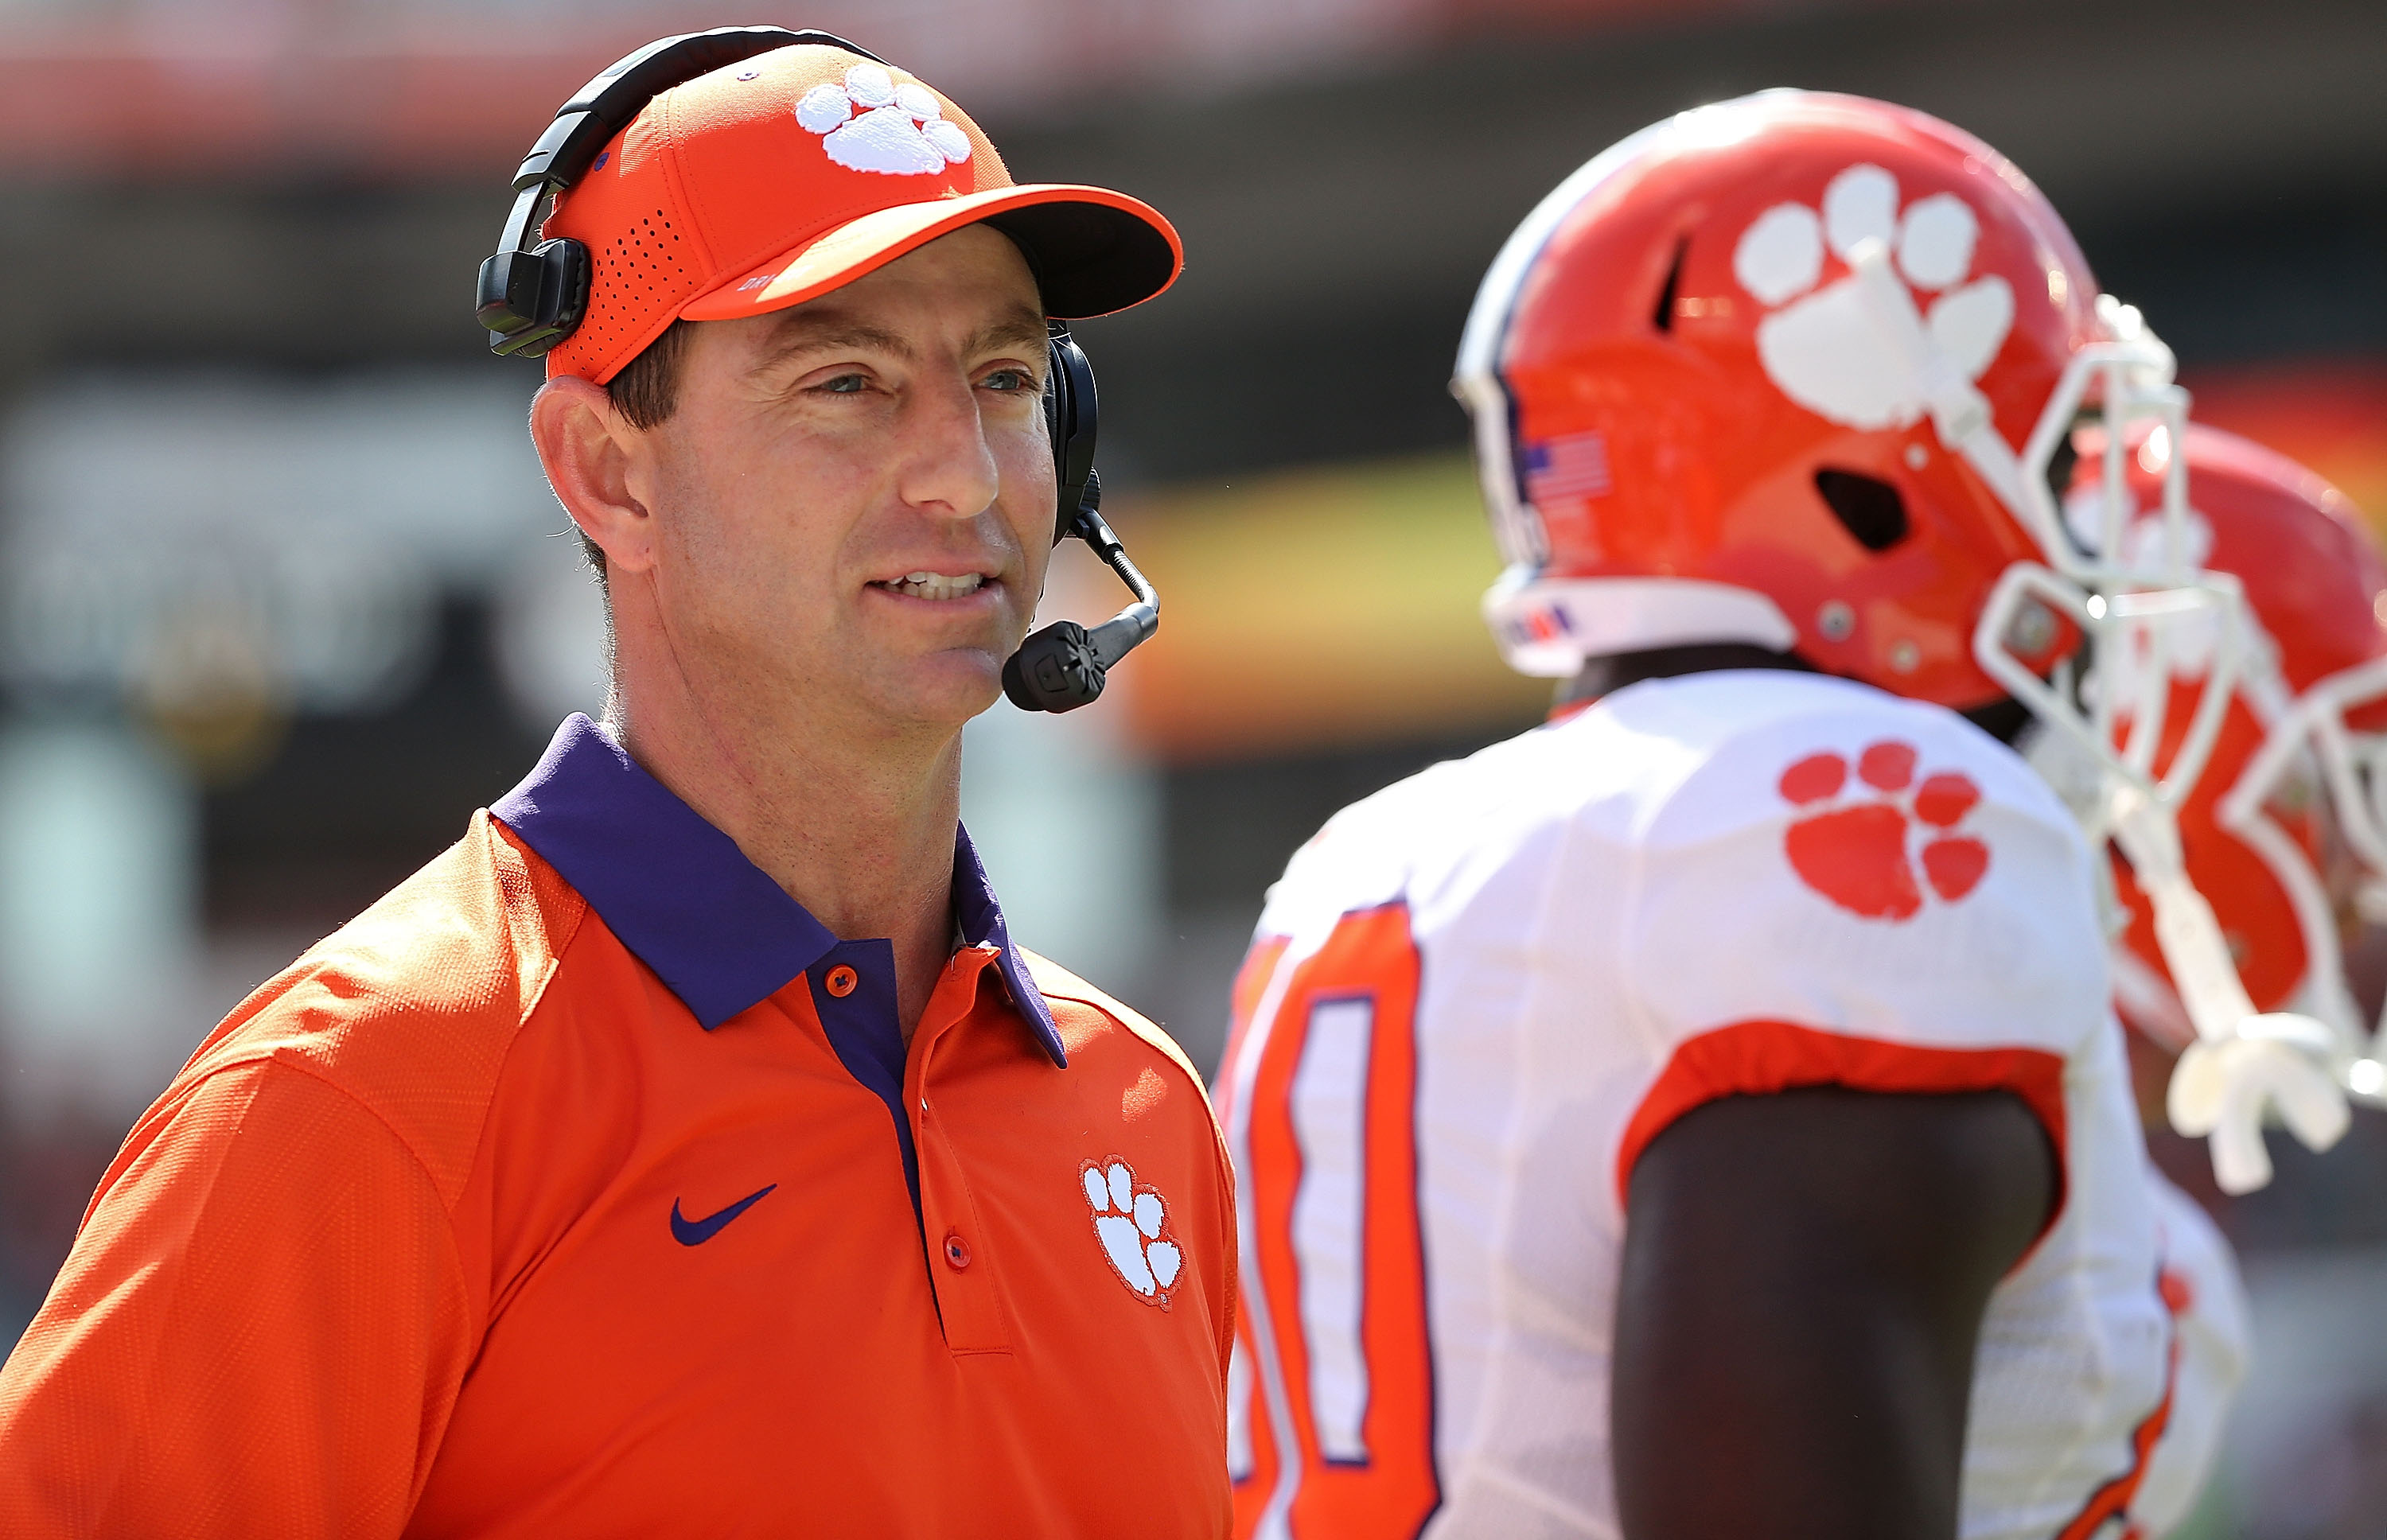 Dabo Swinney of the Clemson Tigers during a game in Miami Gardens, FL on Oct. 24, 2015. (Mike Ehrmann—Getty Images)